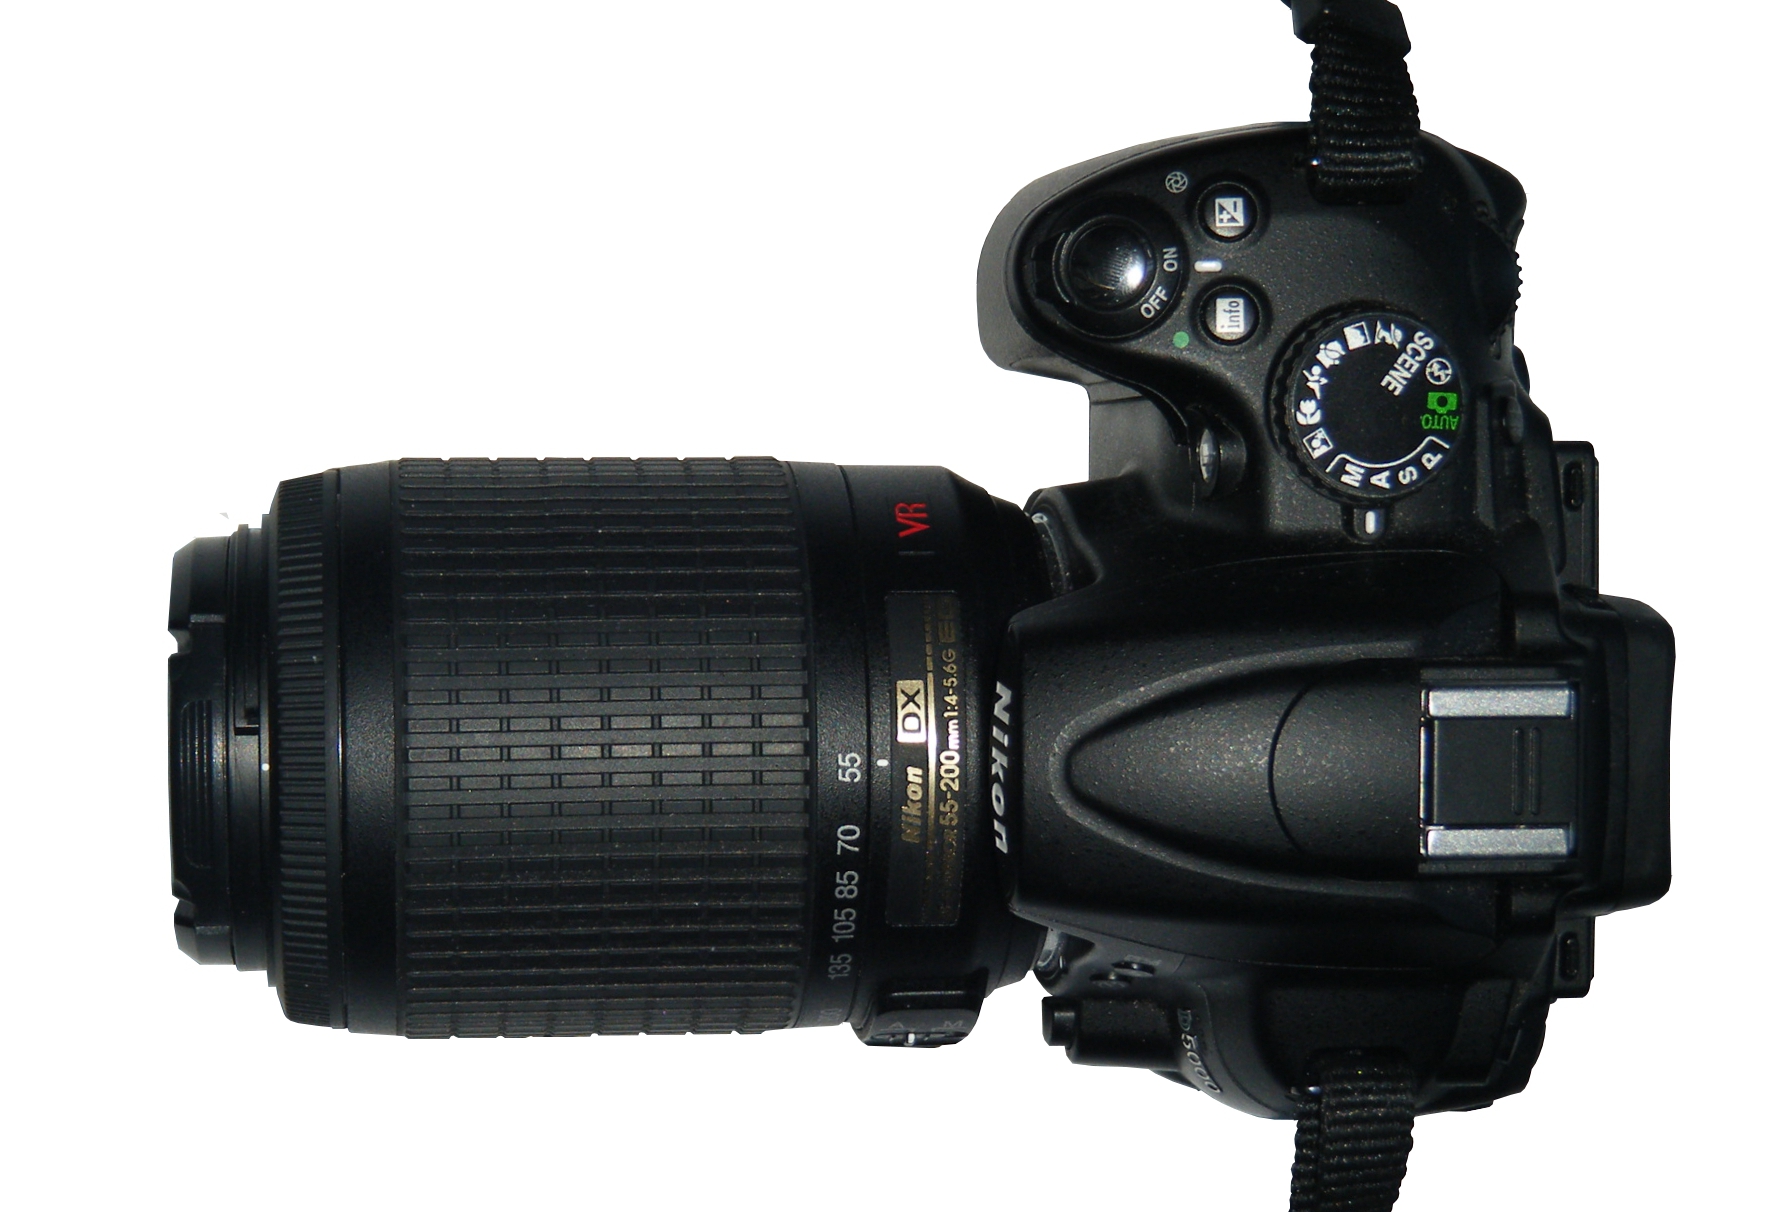 File:Nikon D5000 with 55-200mm lens.JPG - Wikimedia Commons